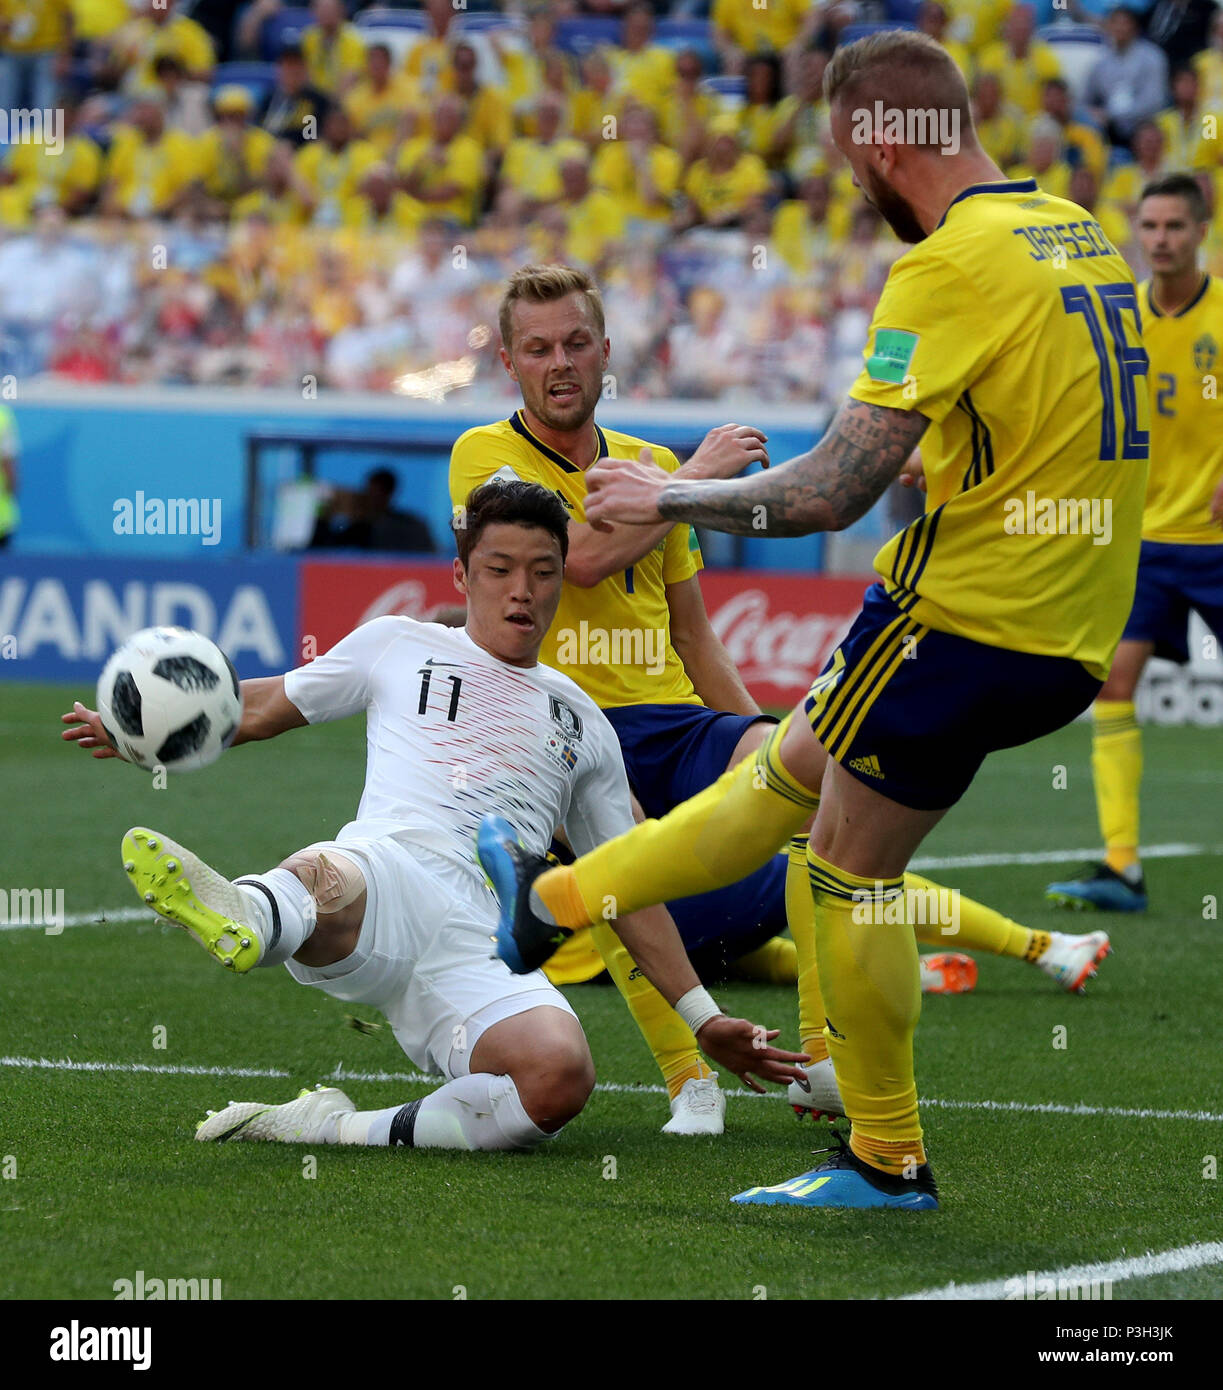 Nizhny Novgorod, Russia. 18th June, 2018. Hwang Heechan (L bottom) of South Korea vies with Pontus Jansson (R front) during a group F match between Sweden and South Korea at the 2018 FIFA World Cup in Nizhny Novgorod, Russia, June 18, 2018. Credit: Yang Lei/Xinhua/Alamy Live News Stock Photo